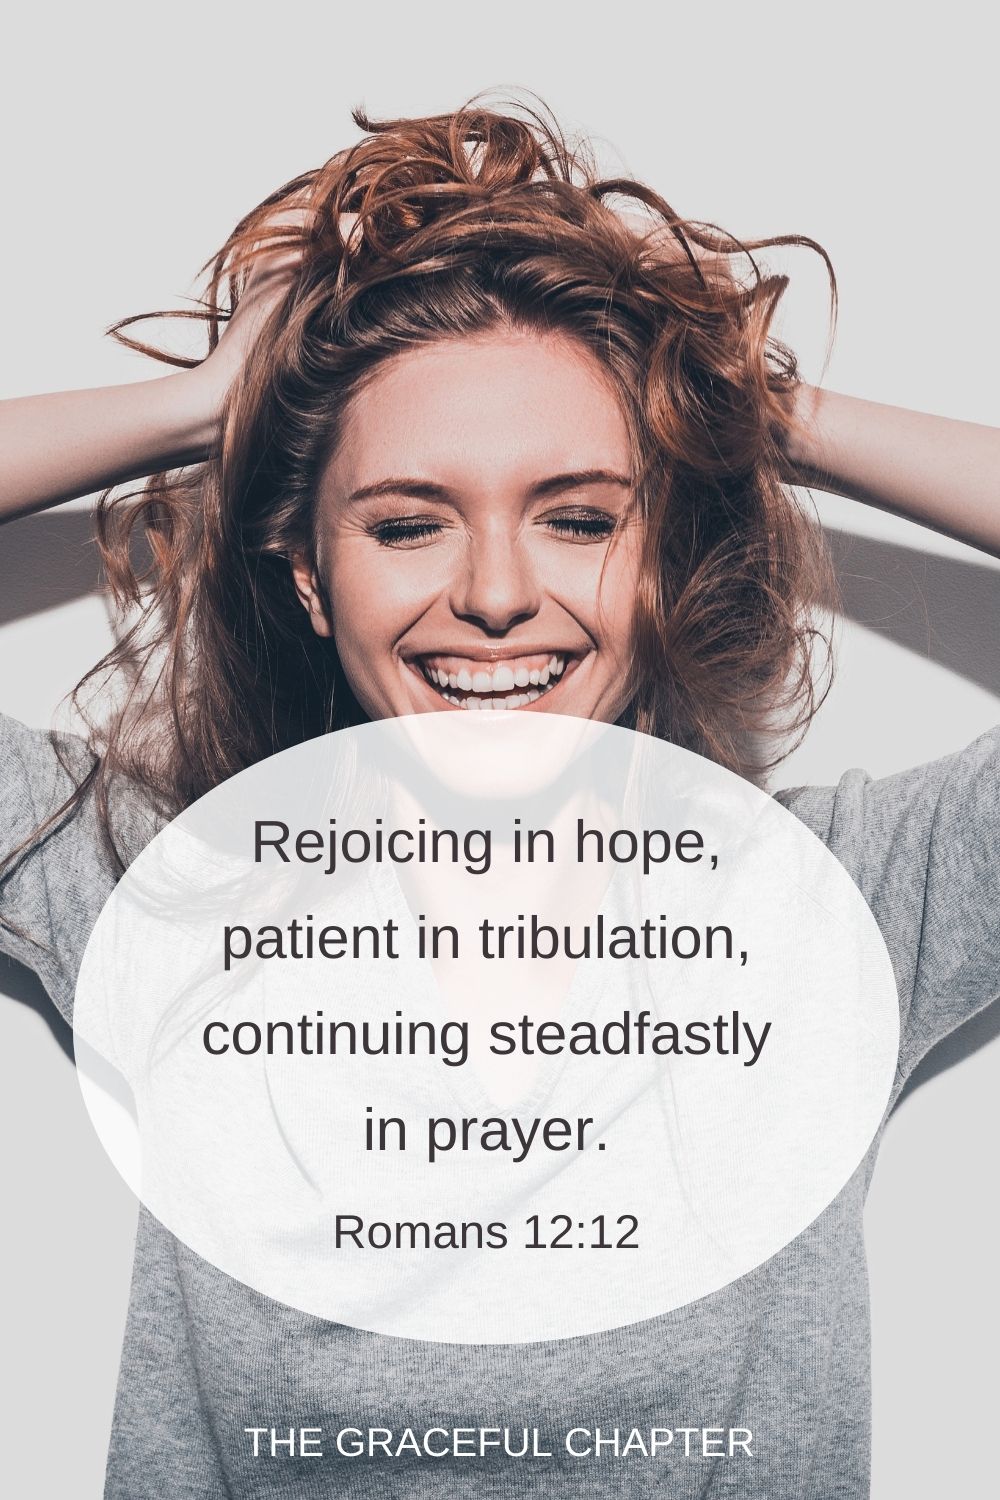 Rejoicing in hope, patient in tribulation, continuing steadfastly in prayer; Romans 12:12